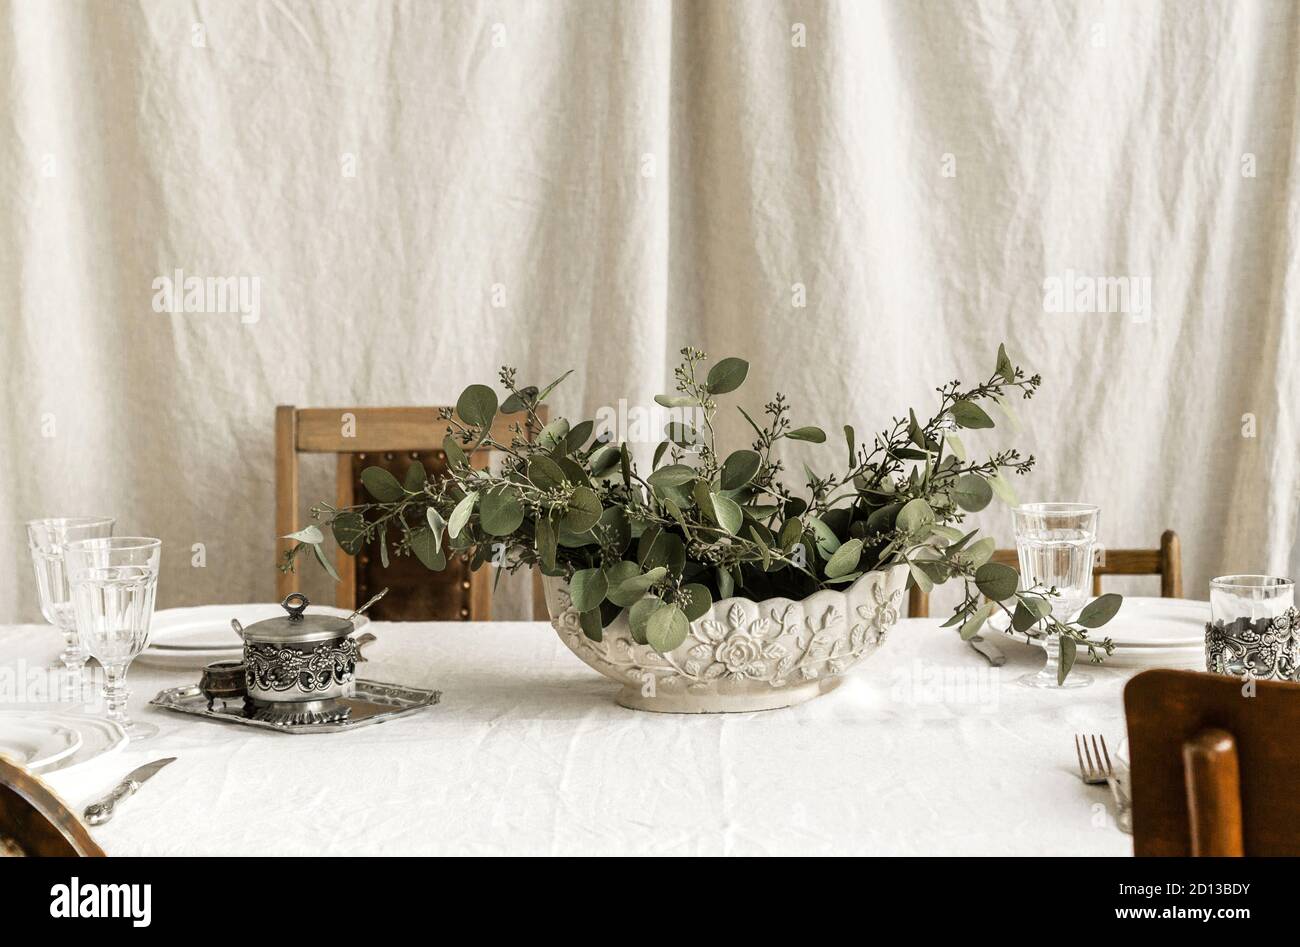 Decorated boho table. The table is covered with a tablecloth, plates, glasses and a vase with a green plant Stock Photo